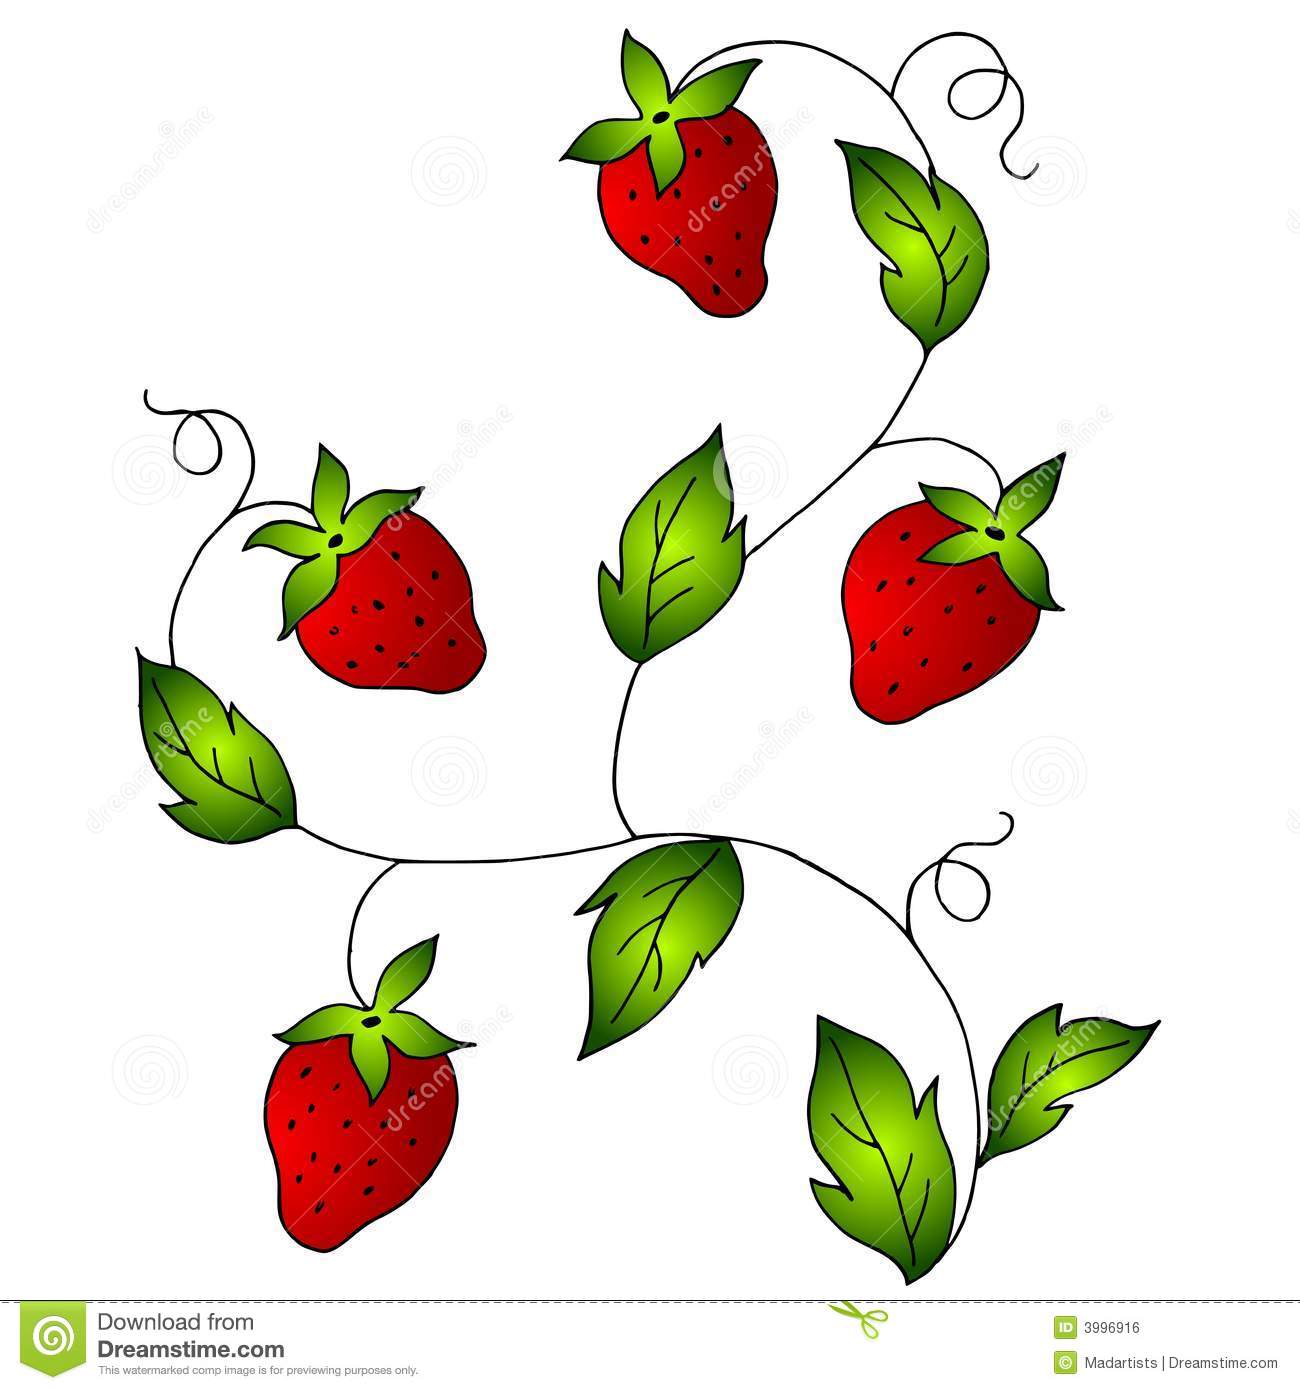 Bright Red Strawberries On Vine Royalty Free Stock Image   Image    